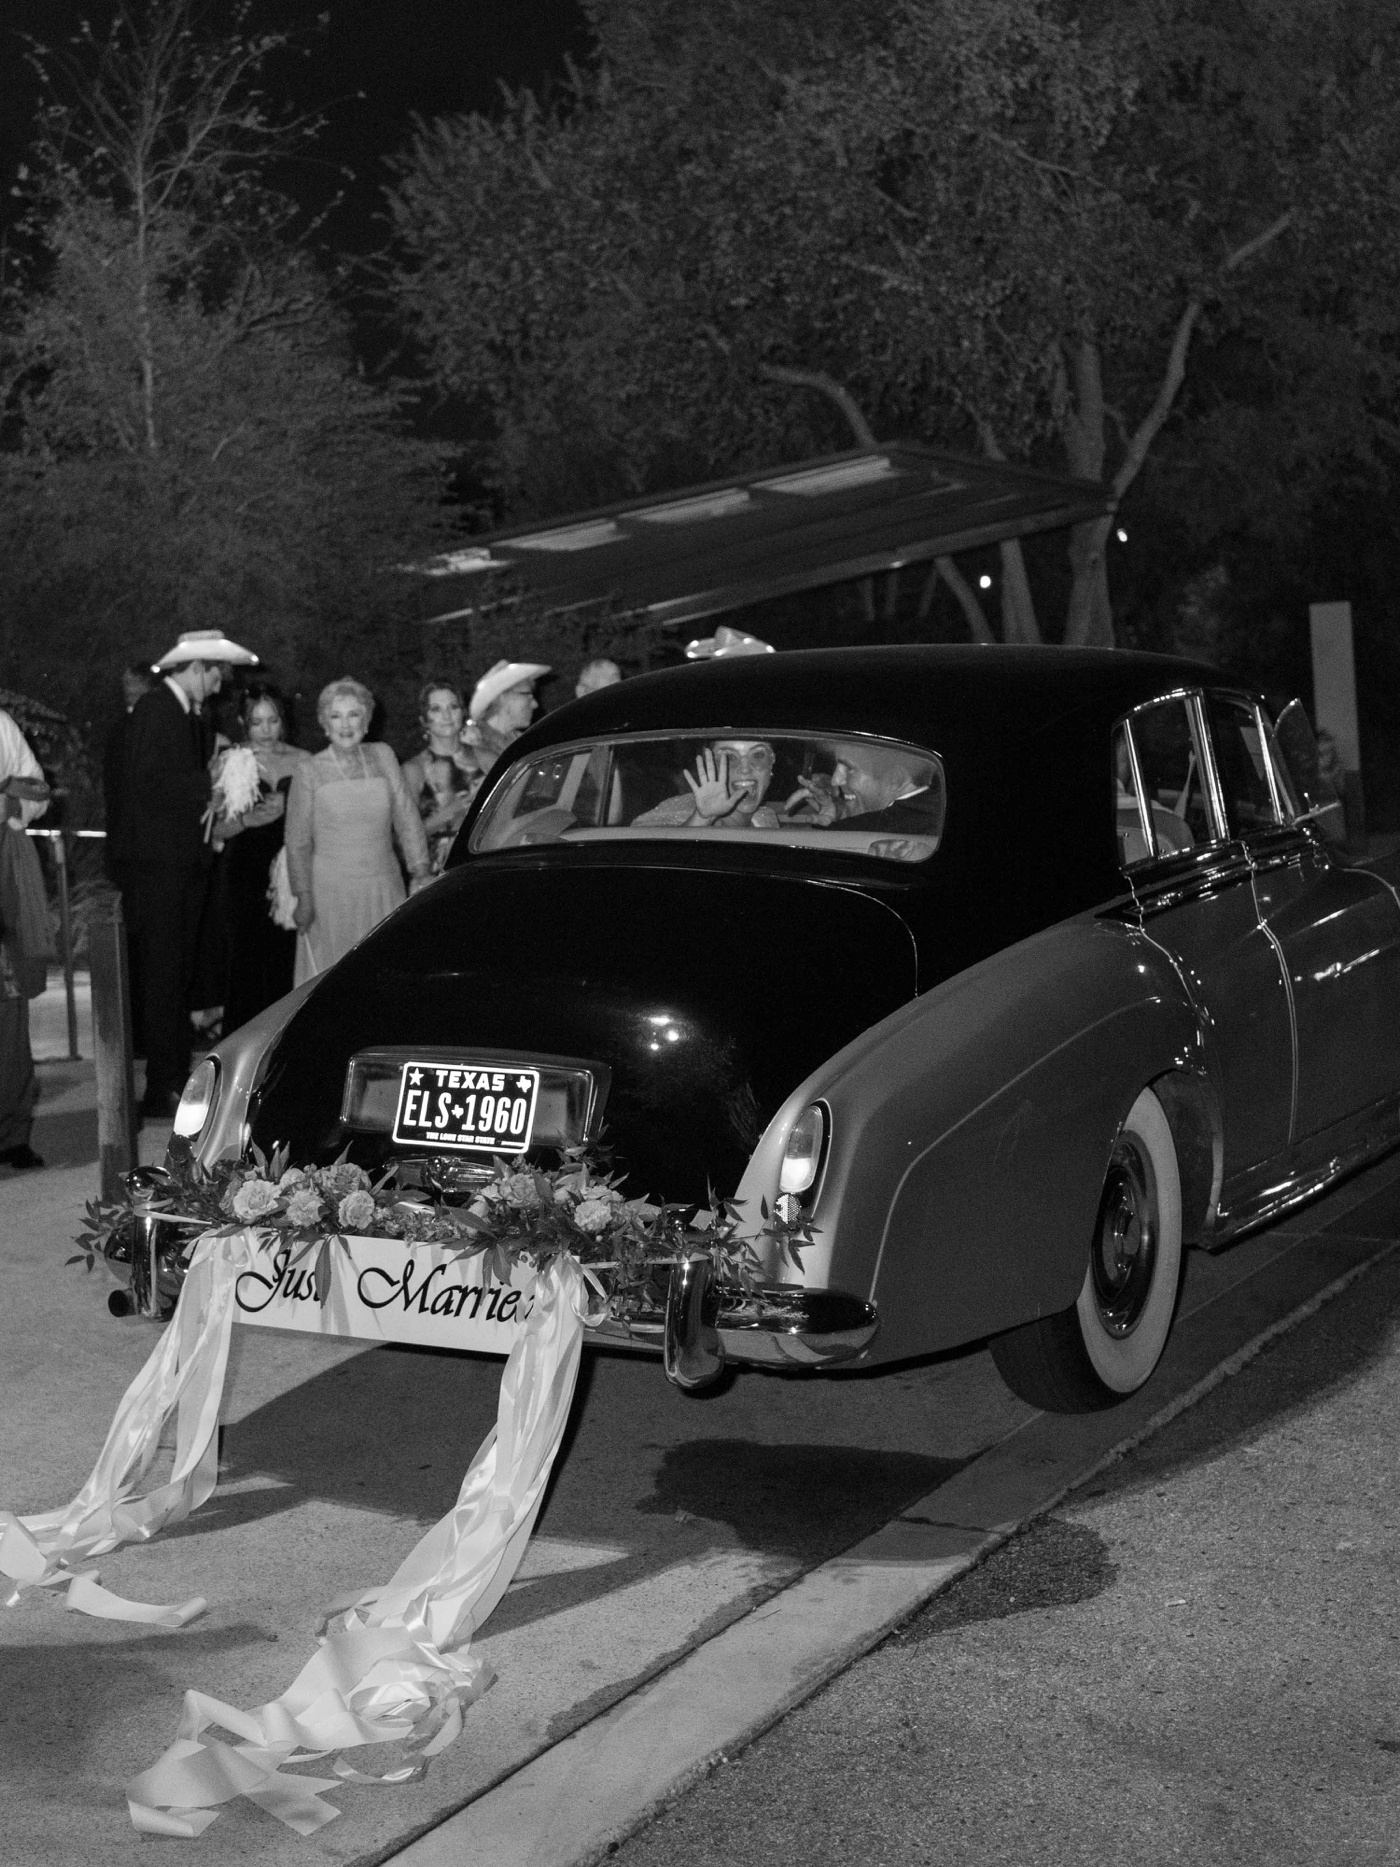 Vintage limousine with a Just Married bumper leaving a Texas wedding